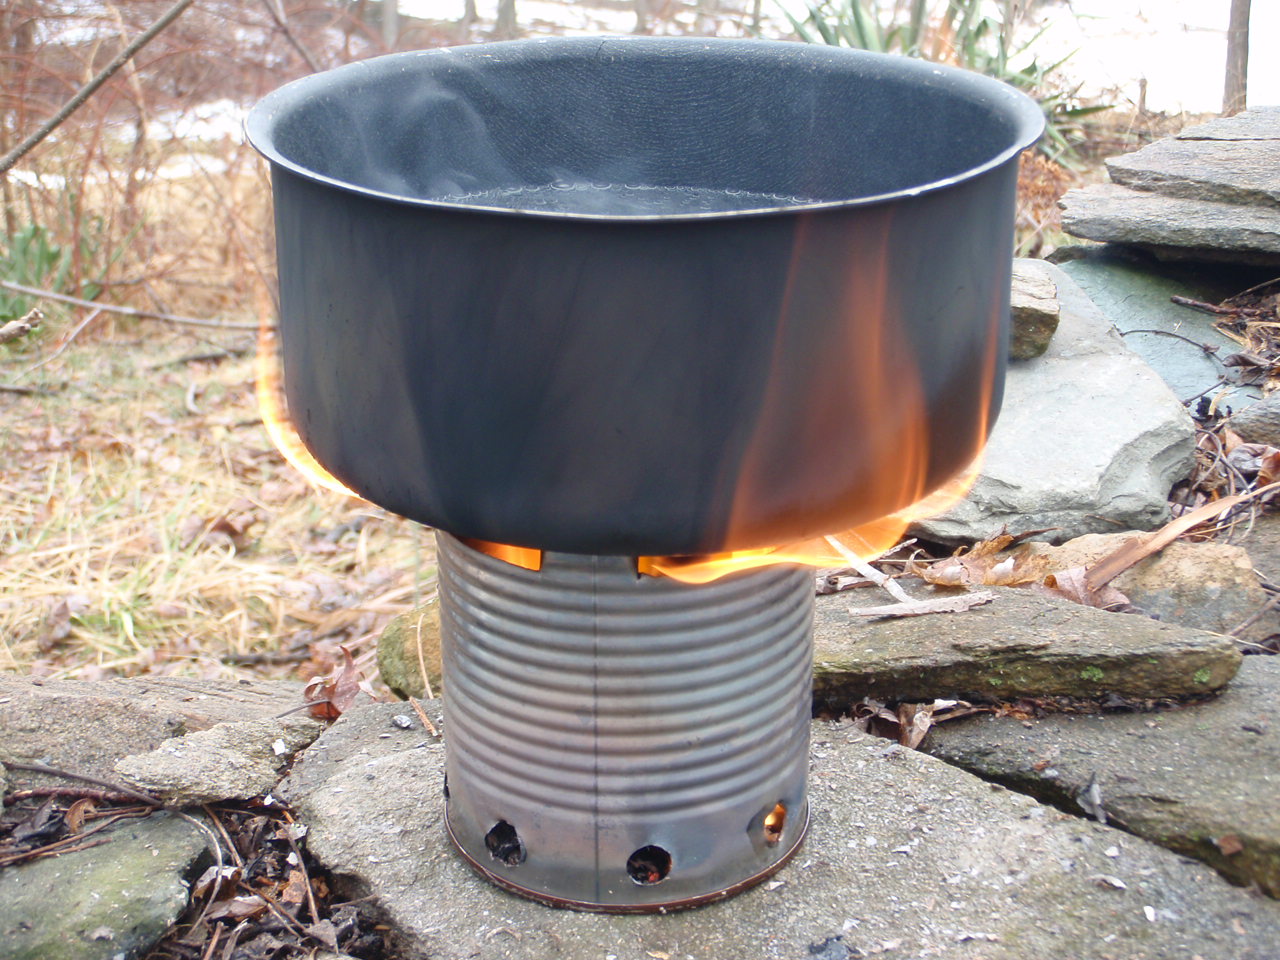 can stove for cooking